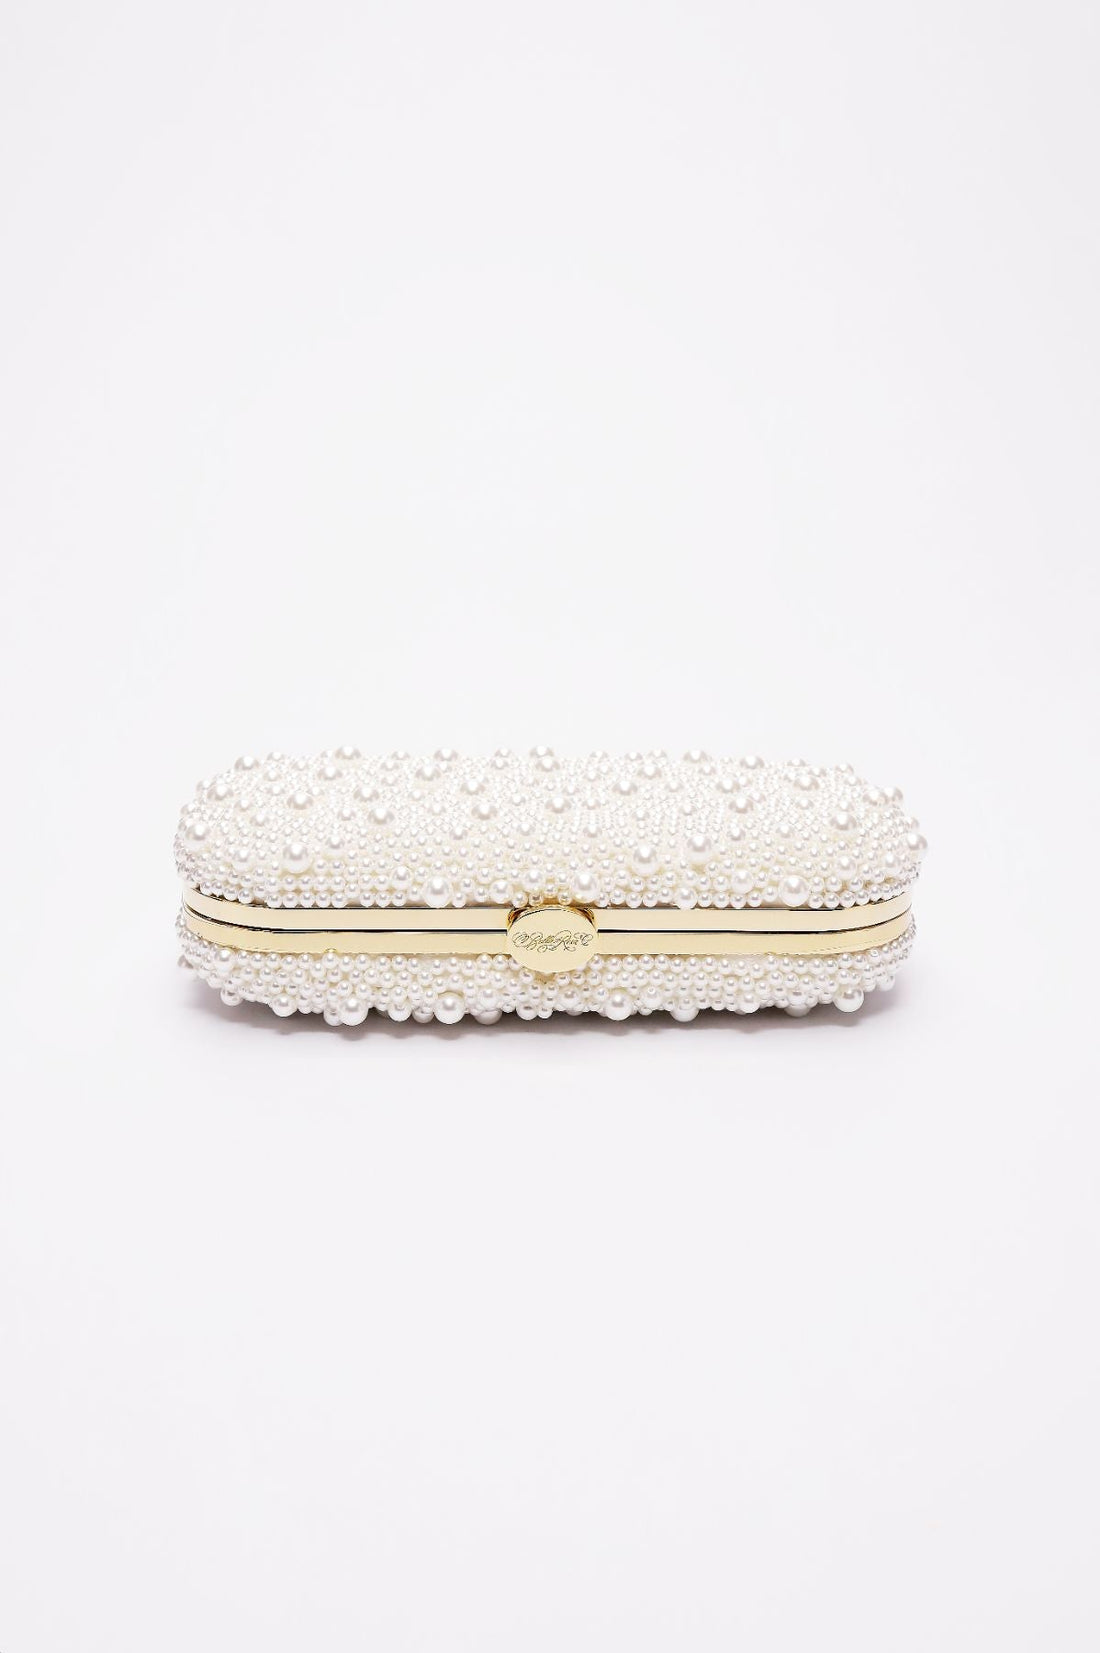 A True Love Pearl Clutch from The Bella Rosa Collection with a gold clasp on a white background.